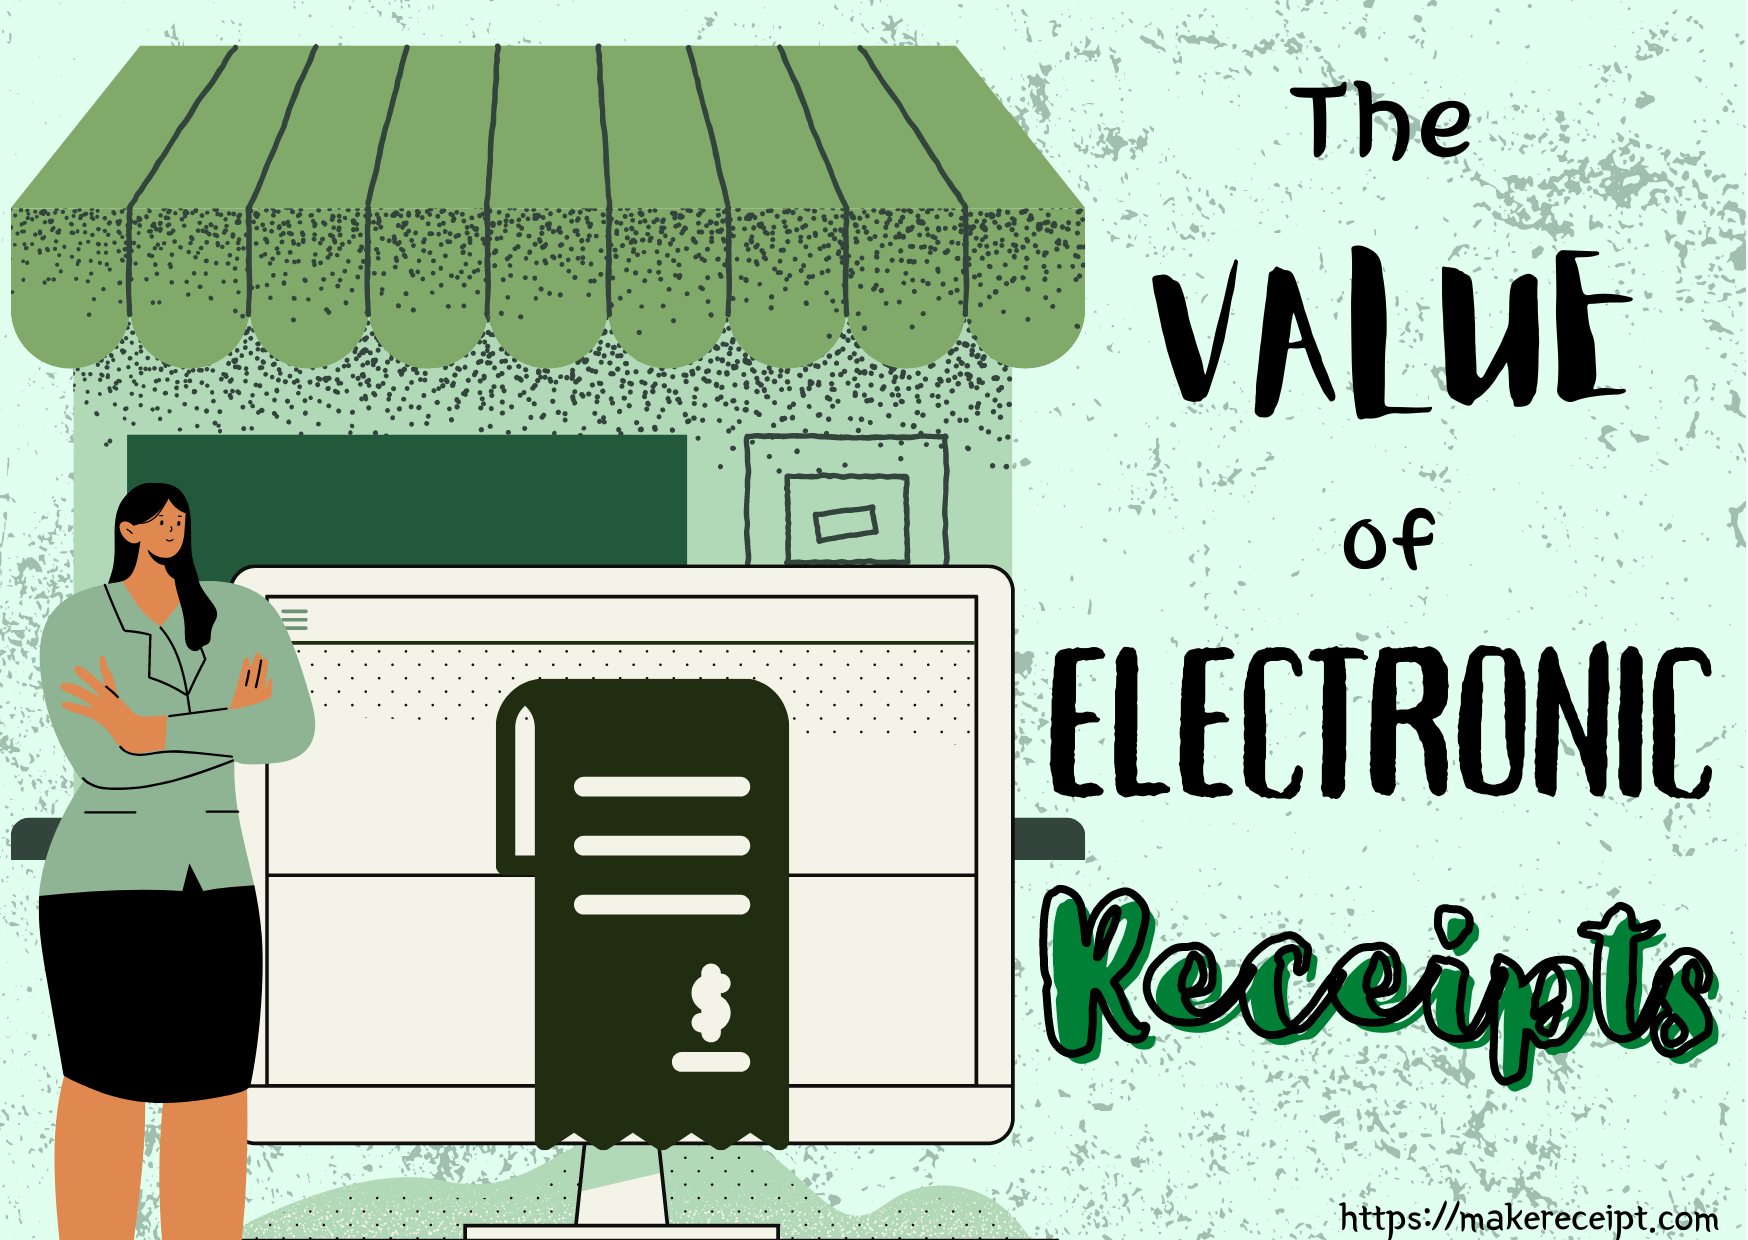 The Value of Electronic Receipts